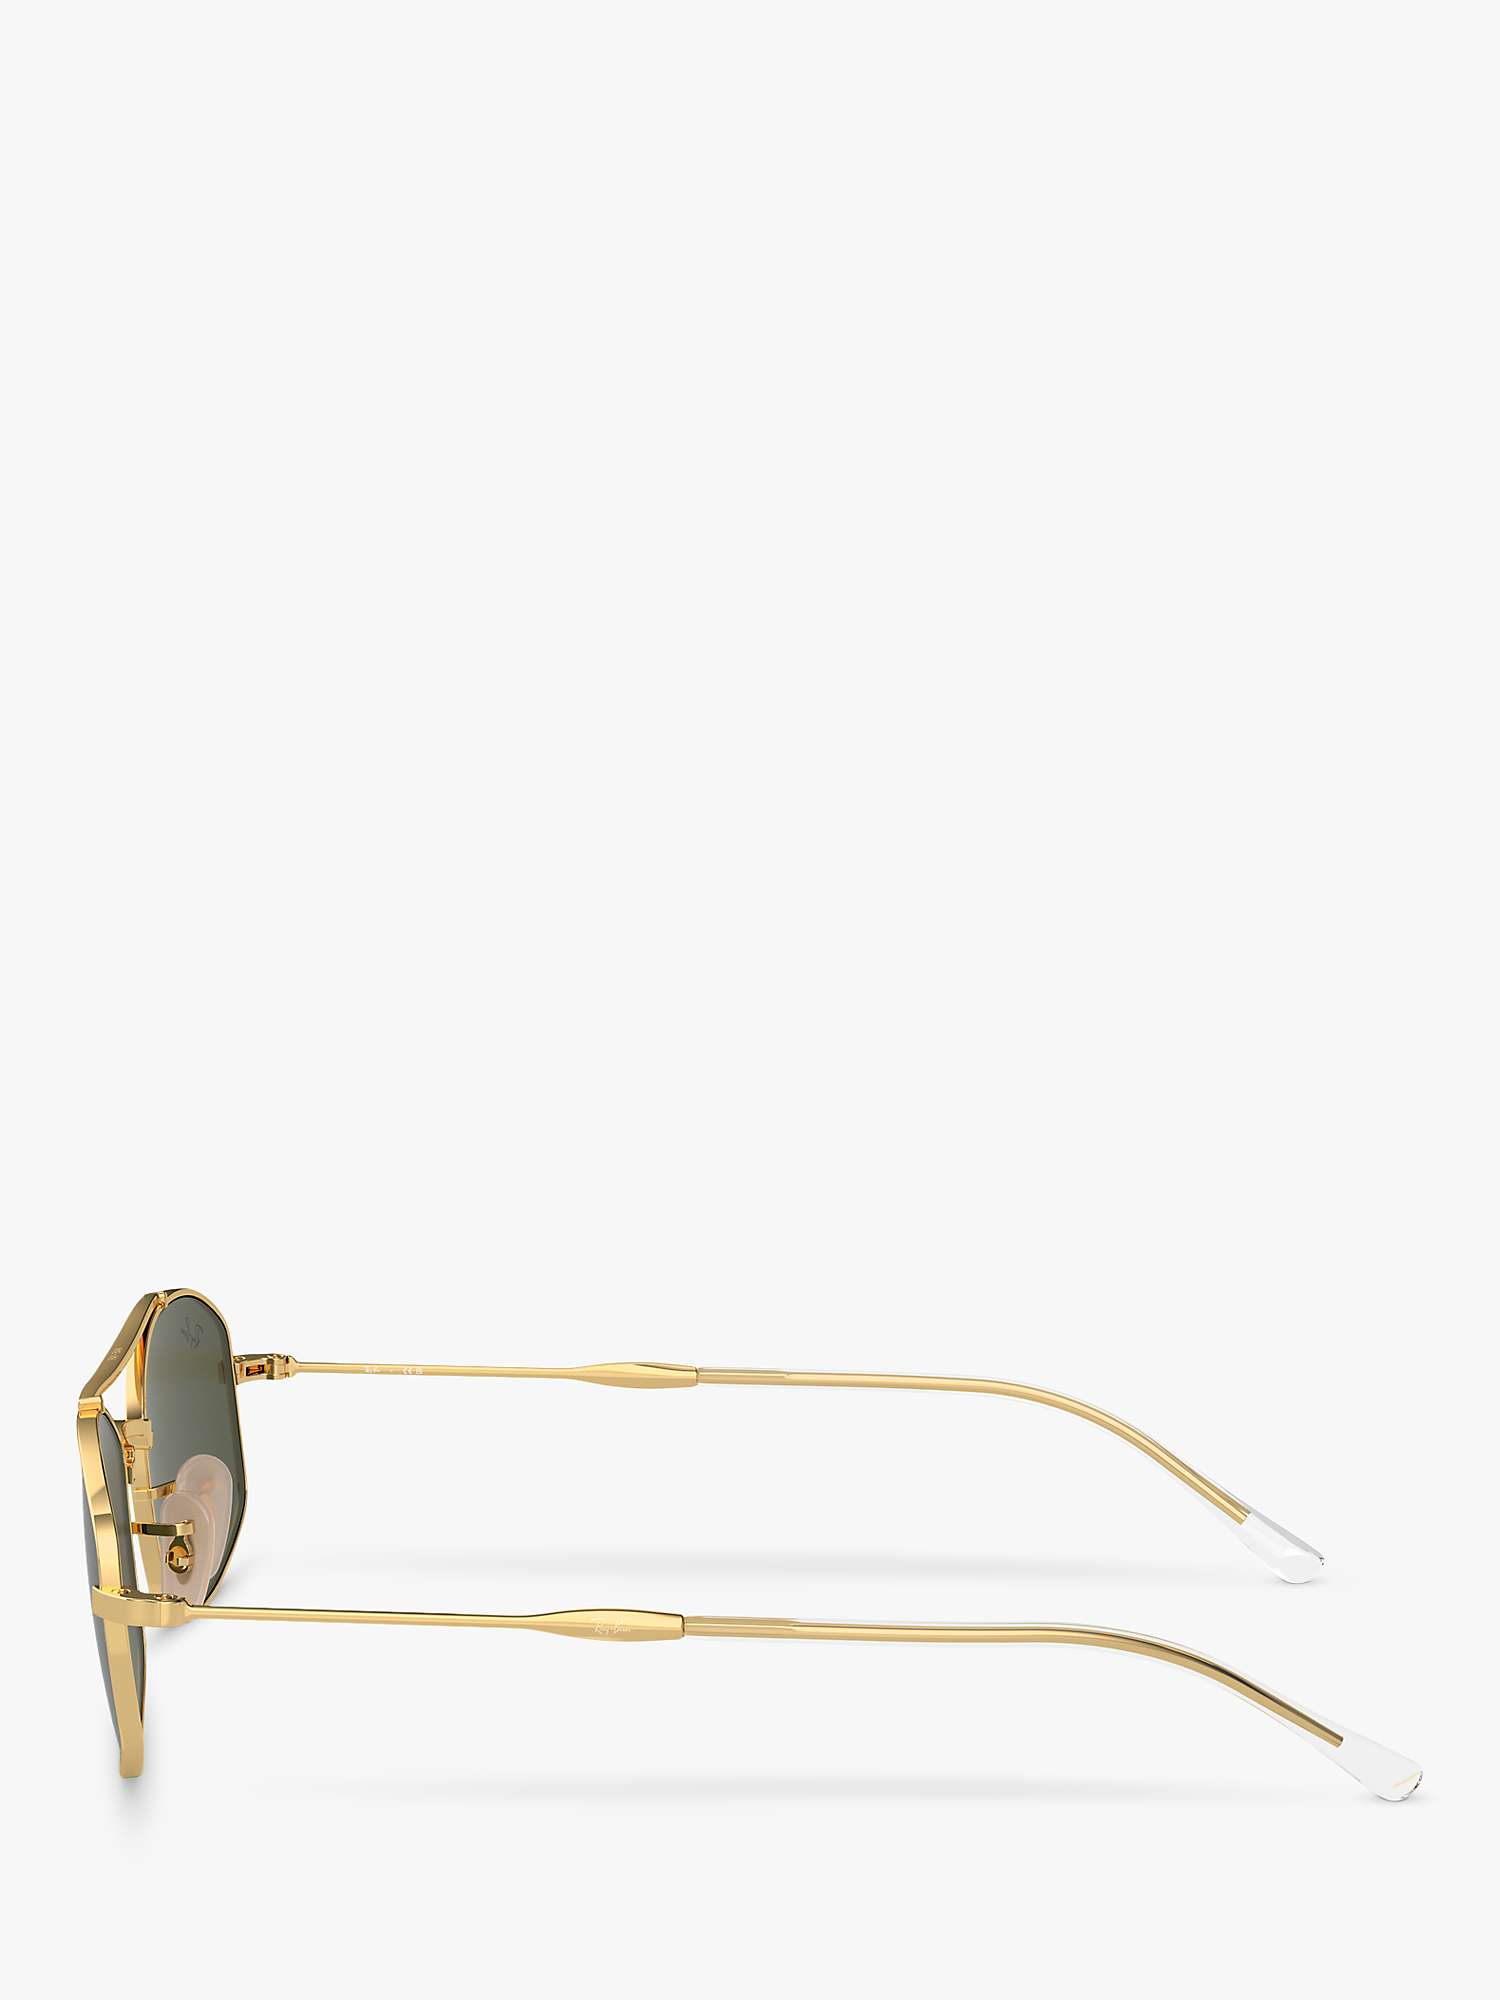 Buy Ray-Ban RB3719 Unisex Oval Sunglasses, Gold/Green Online at johnlewis.com